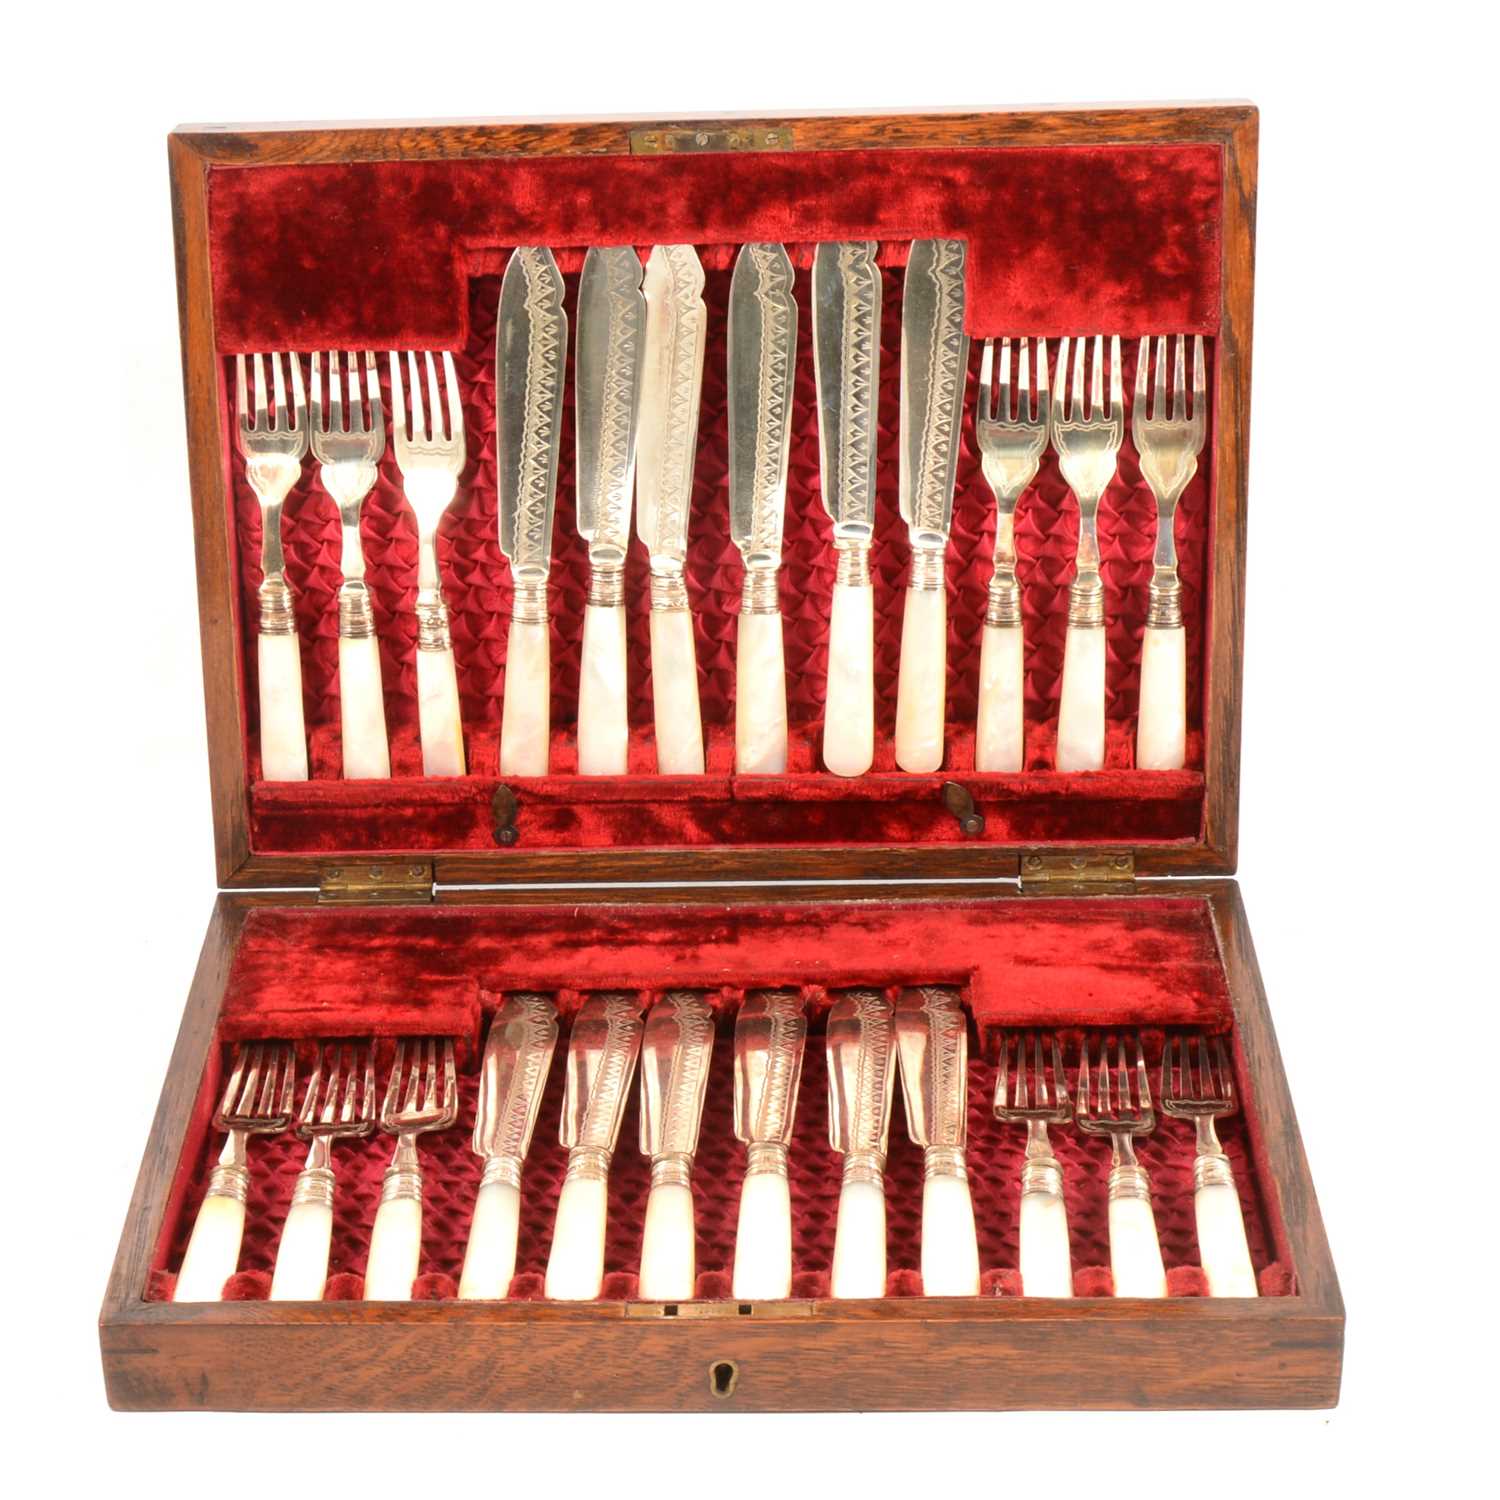 Canteen of Viner's Ltd silver-plated cutlery, and two sets of fish eaters. - Image 2 of 3